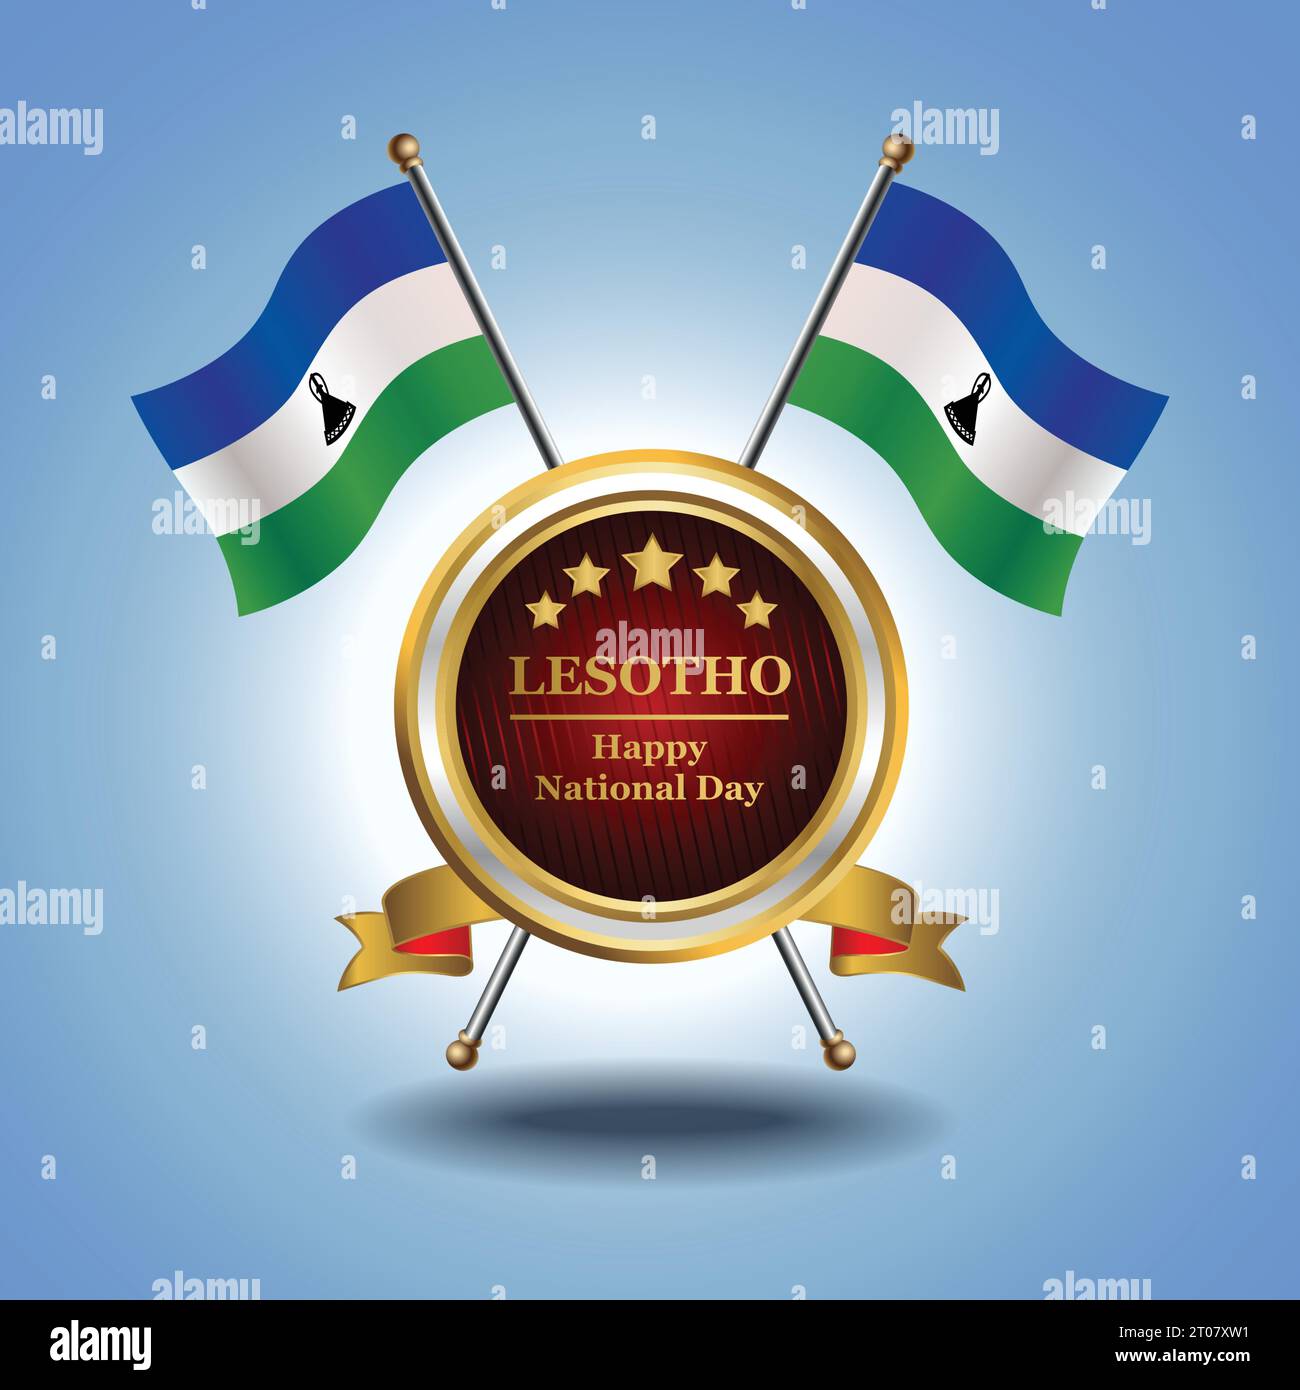 Small National flag of Lesotho on Circle With garadasi blue background Stock Vector